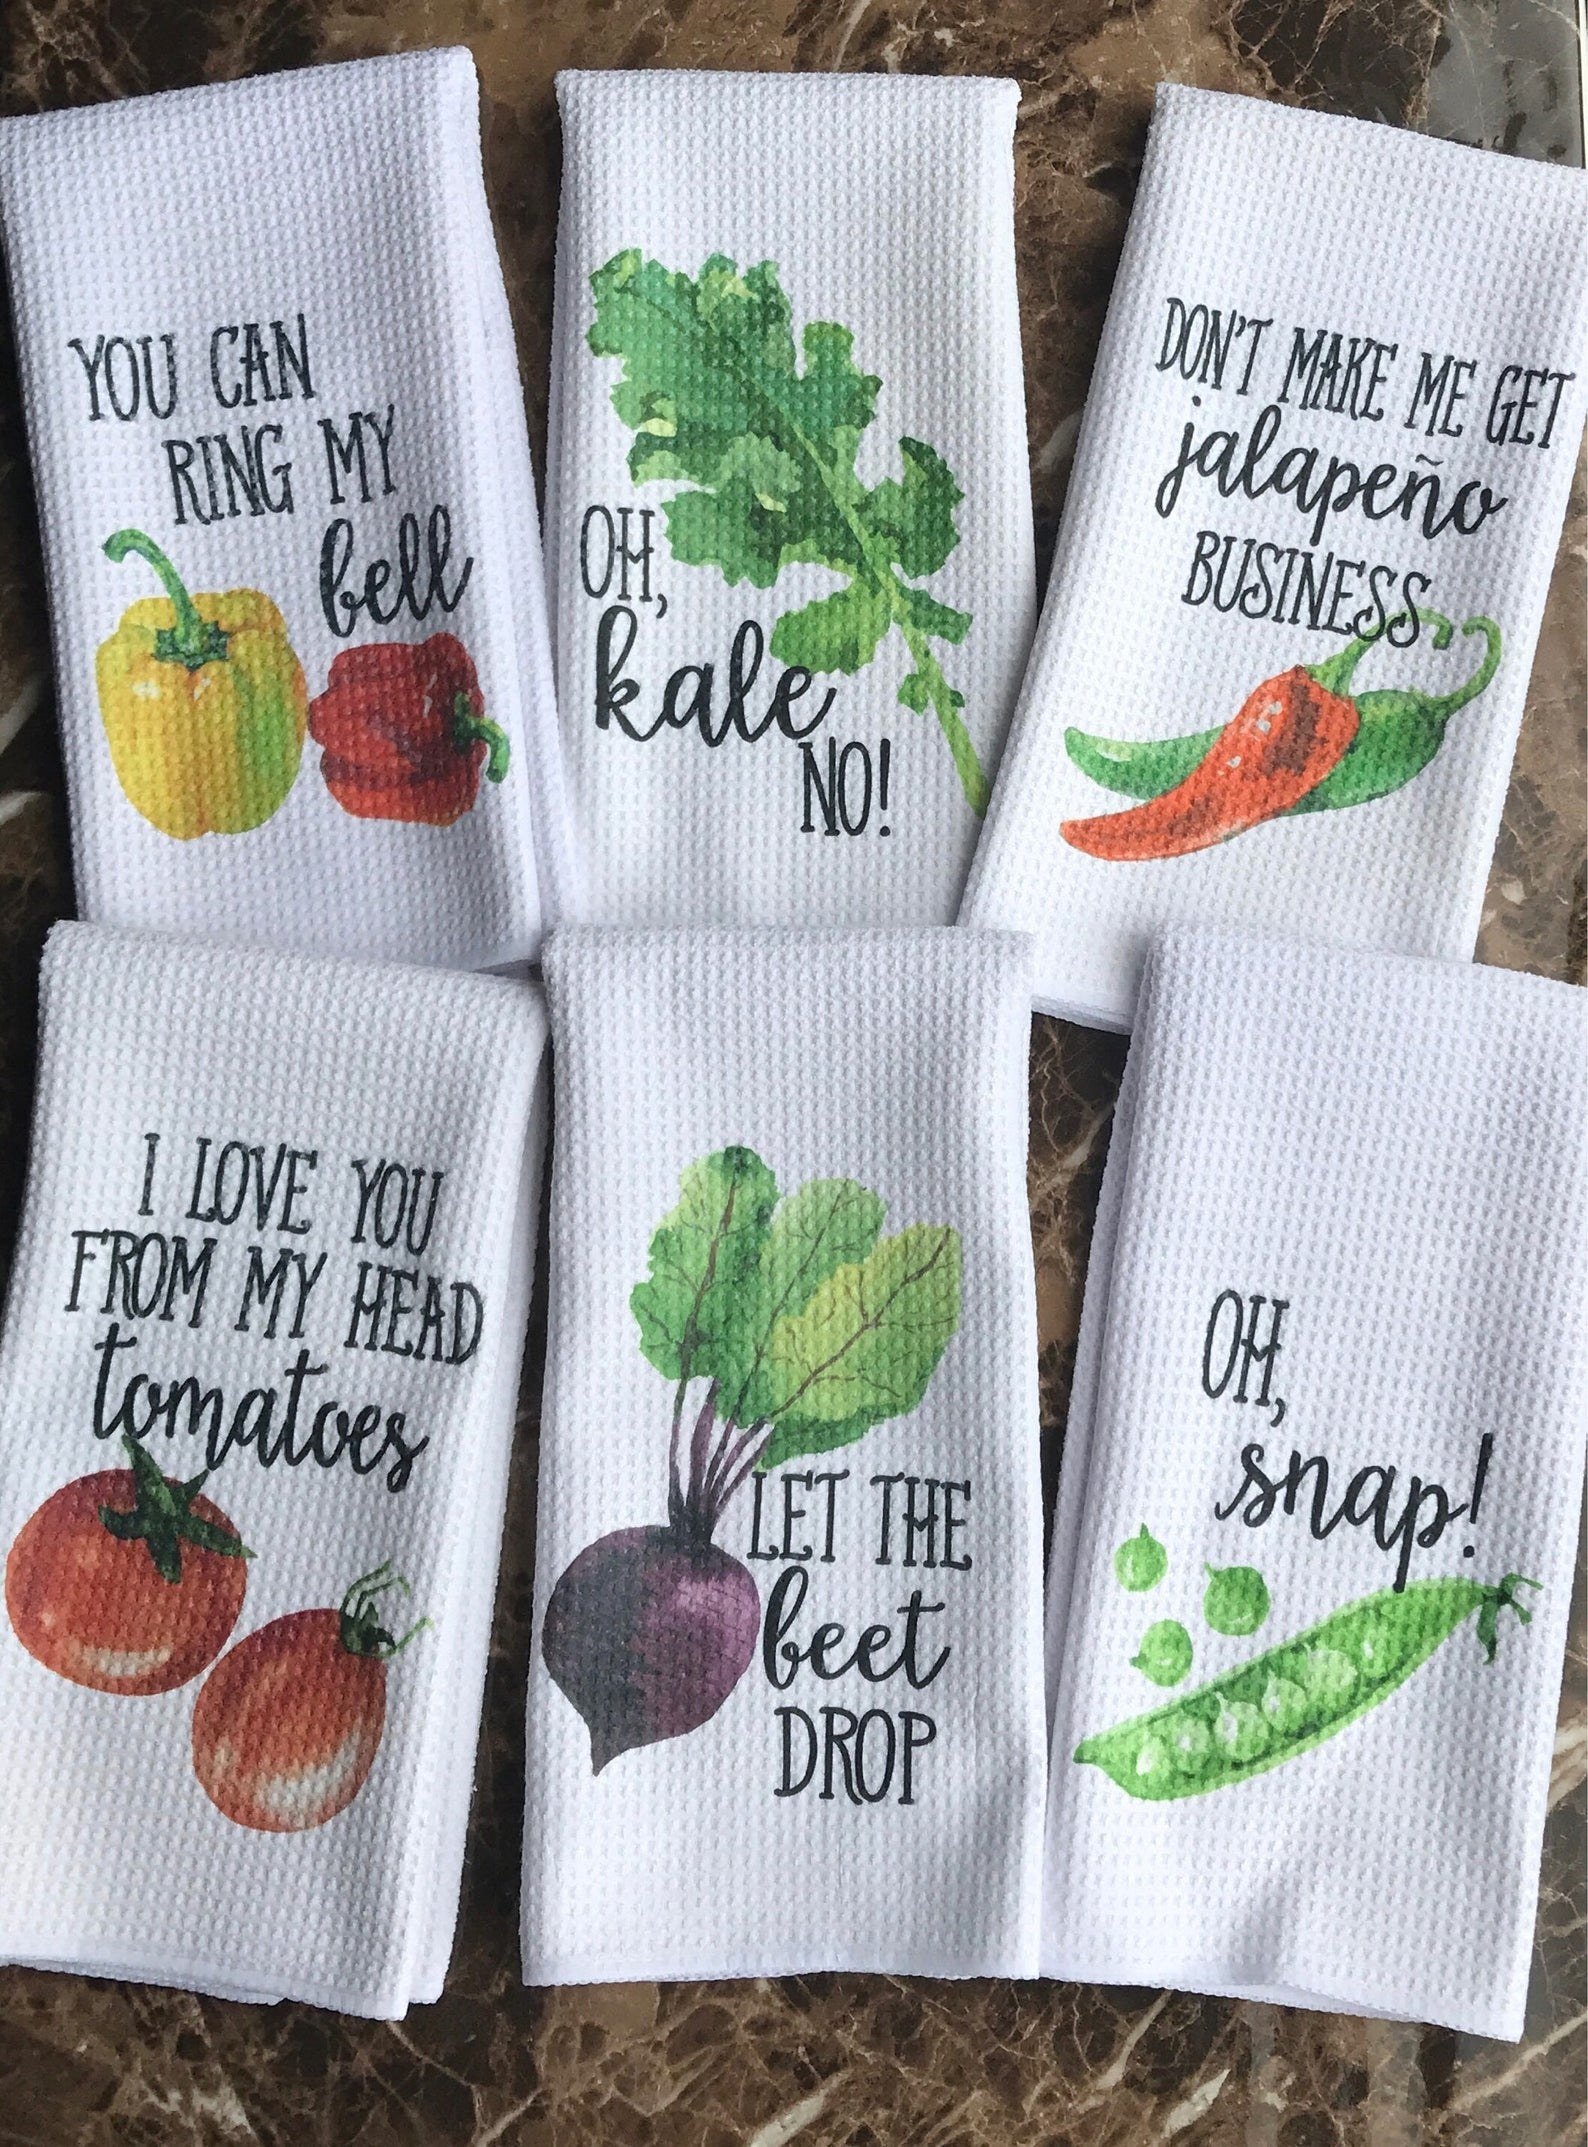 White towels with images of vegetables and puns like &quot;Oh, Snap&quot; and &quot;Let the beet drop&quot; 